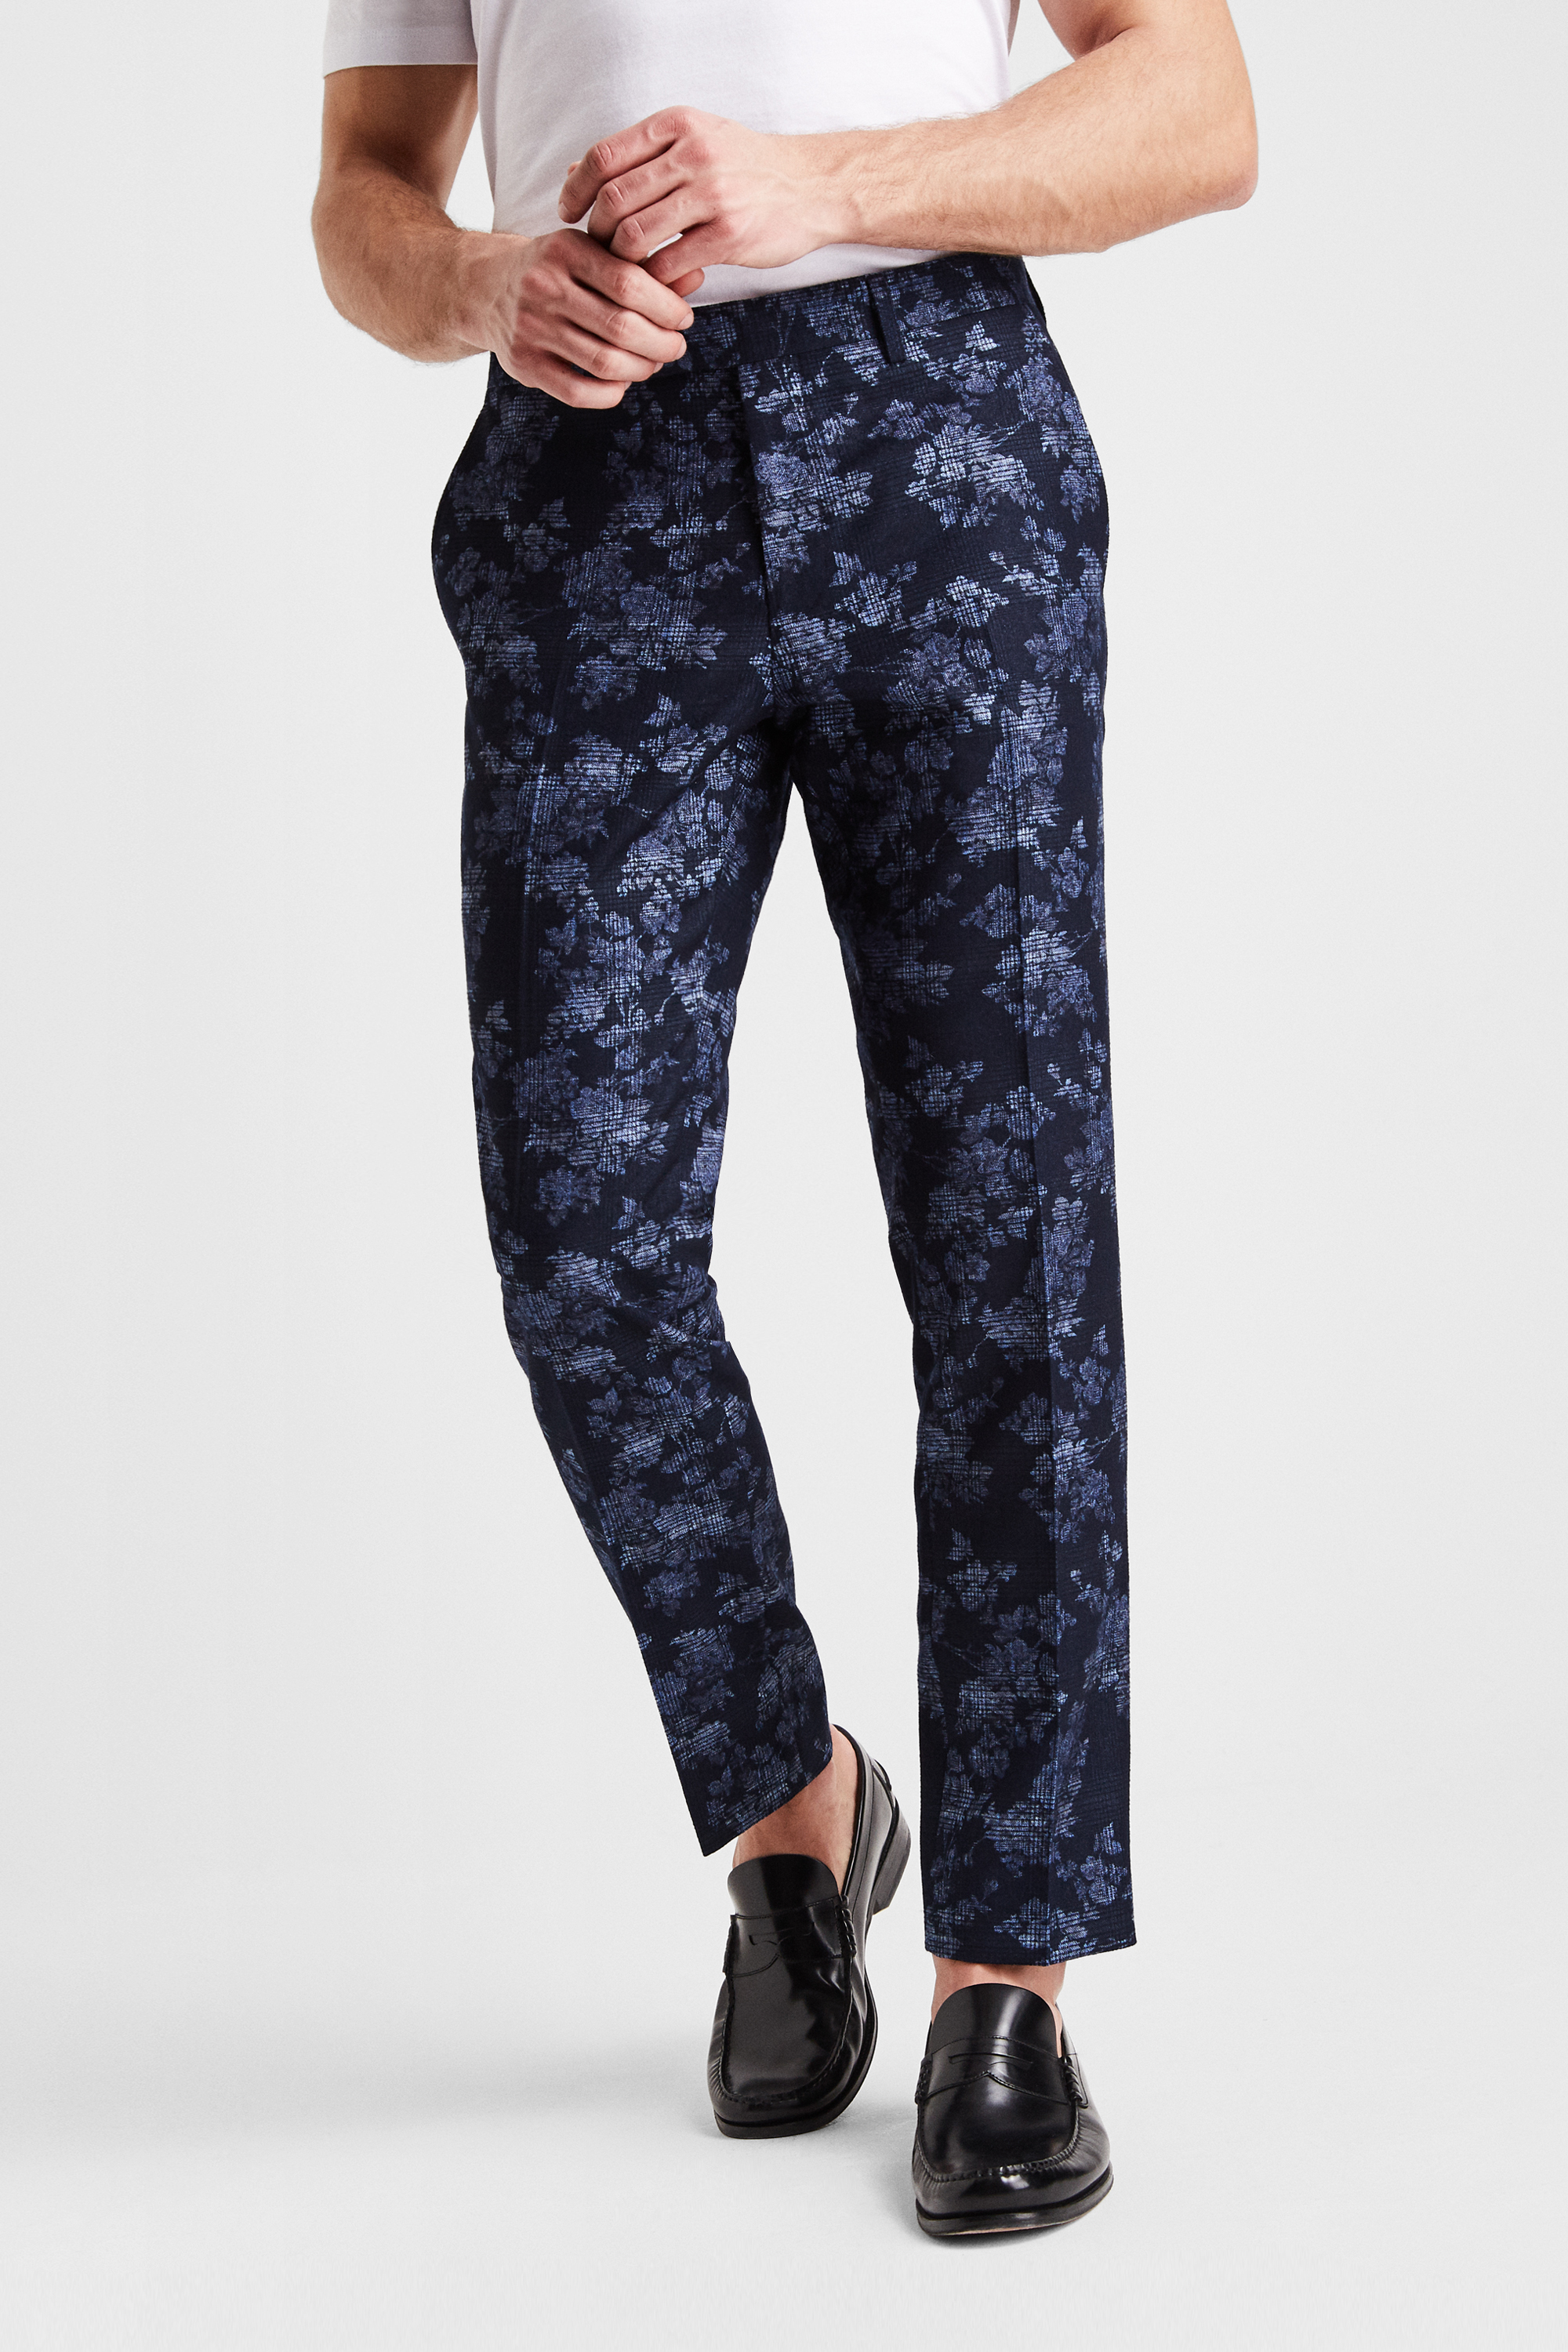 Moss London Slim Fit Blue Floral Check Trousers